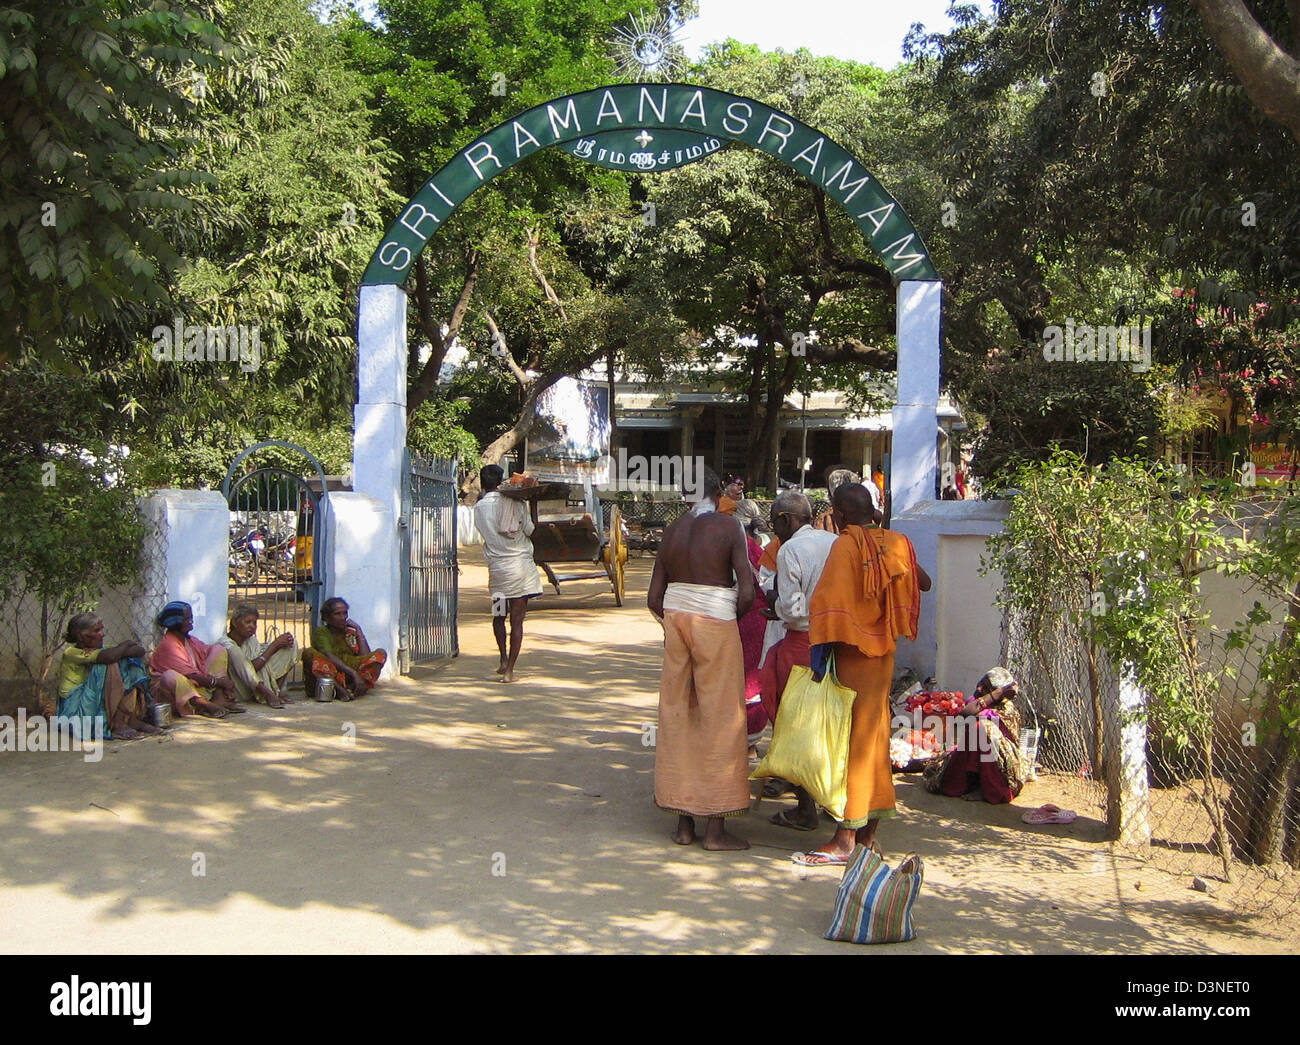 (dpa file) - The picture shows the entrance to the pilgrims' centre Sri Ramanasramam in Tiruvannamalai in the state of Tamil Nadu, India, 25 February 2006. Up-to-date thousands of people pilgrimage from all over the world to the place where the sage Ramana Maharshi (1879-1950) lived his live in modesty and reclusion. Maharshi is one of the most revered figures of spritual life. Pho Stock Photo